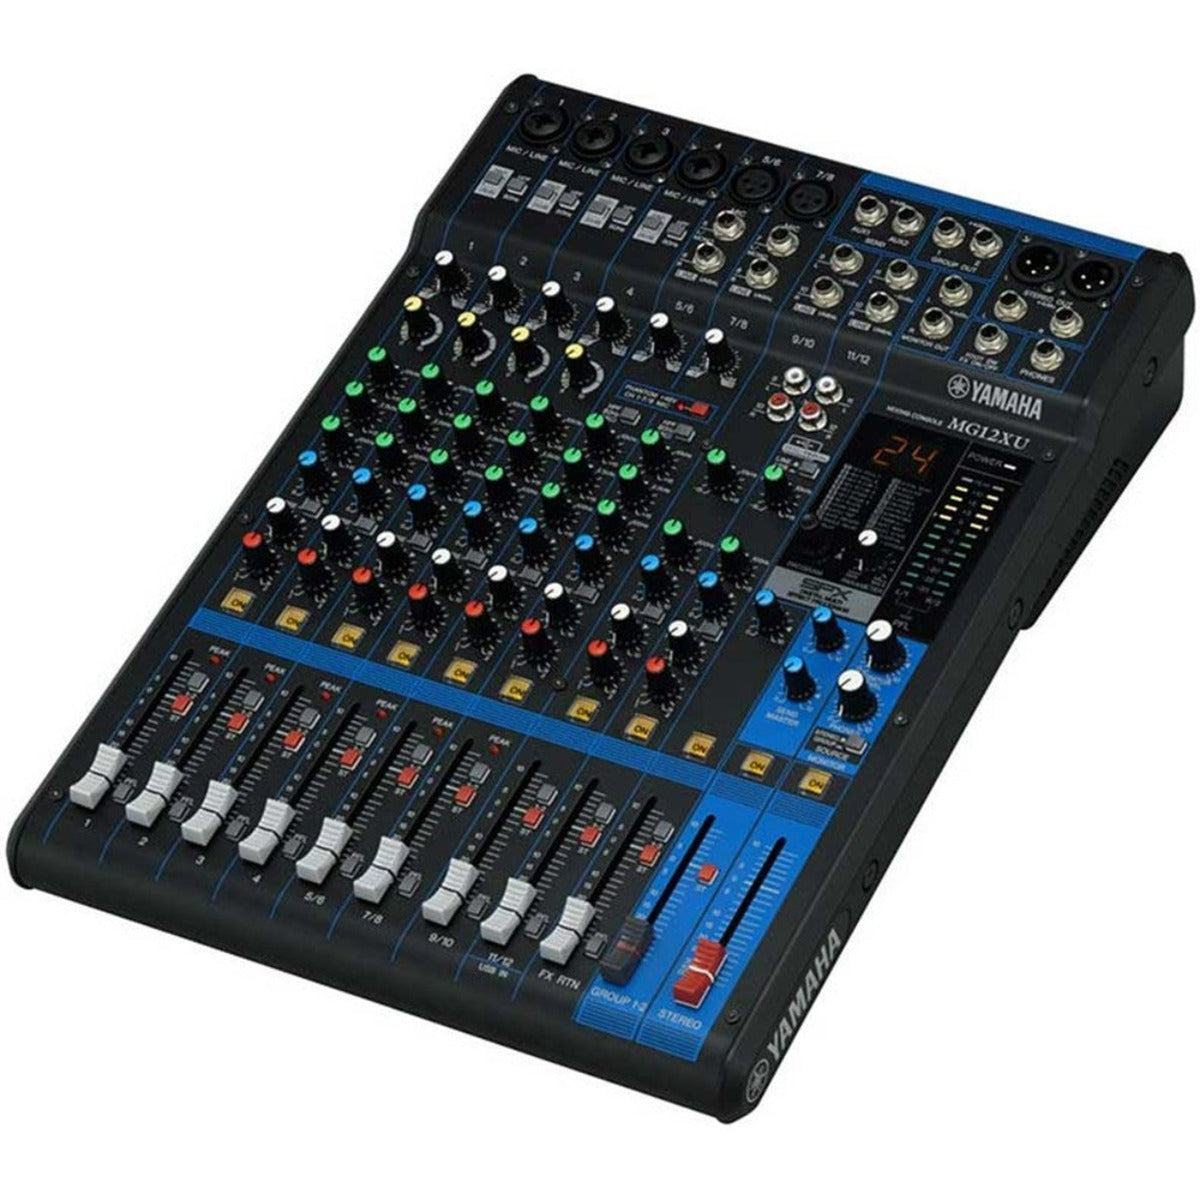 The Yamaha MG12XU is a compact mixer capable of twelve simultaneous inputs that is ideal for performances, recordings lectures and more.